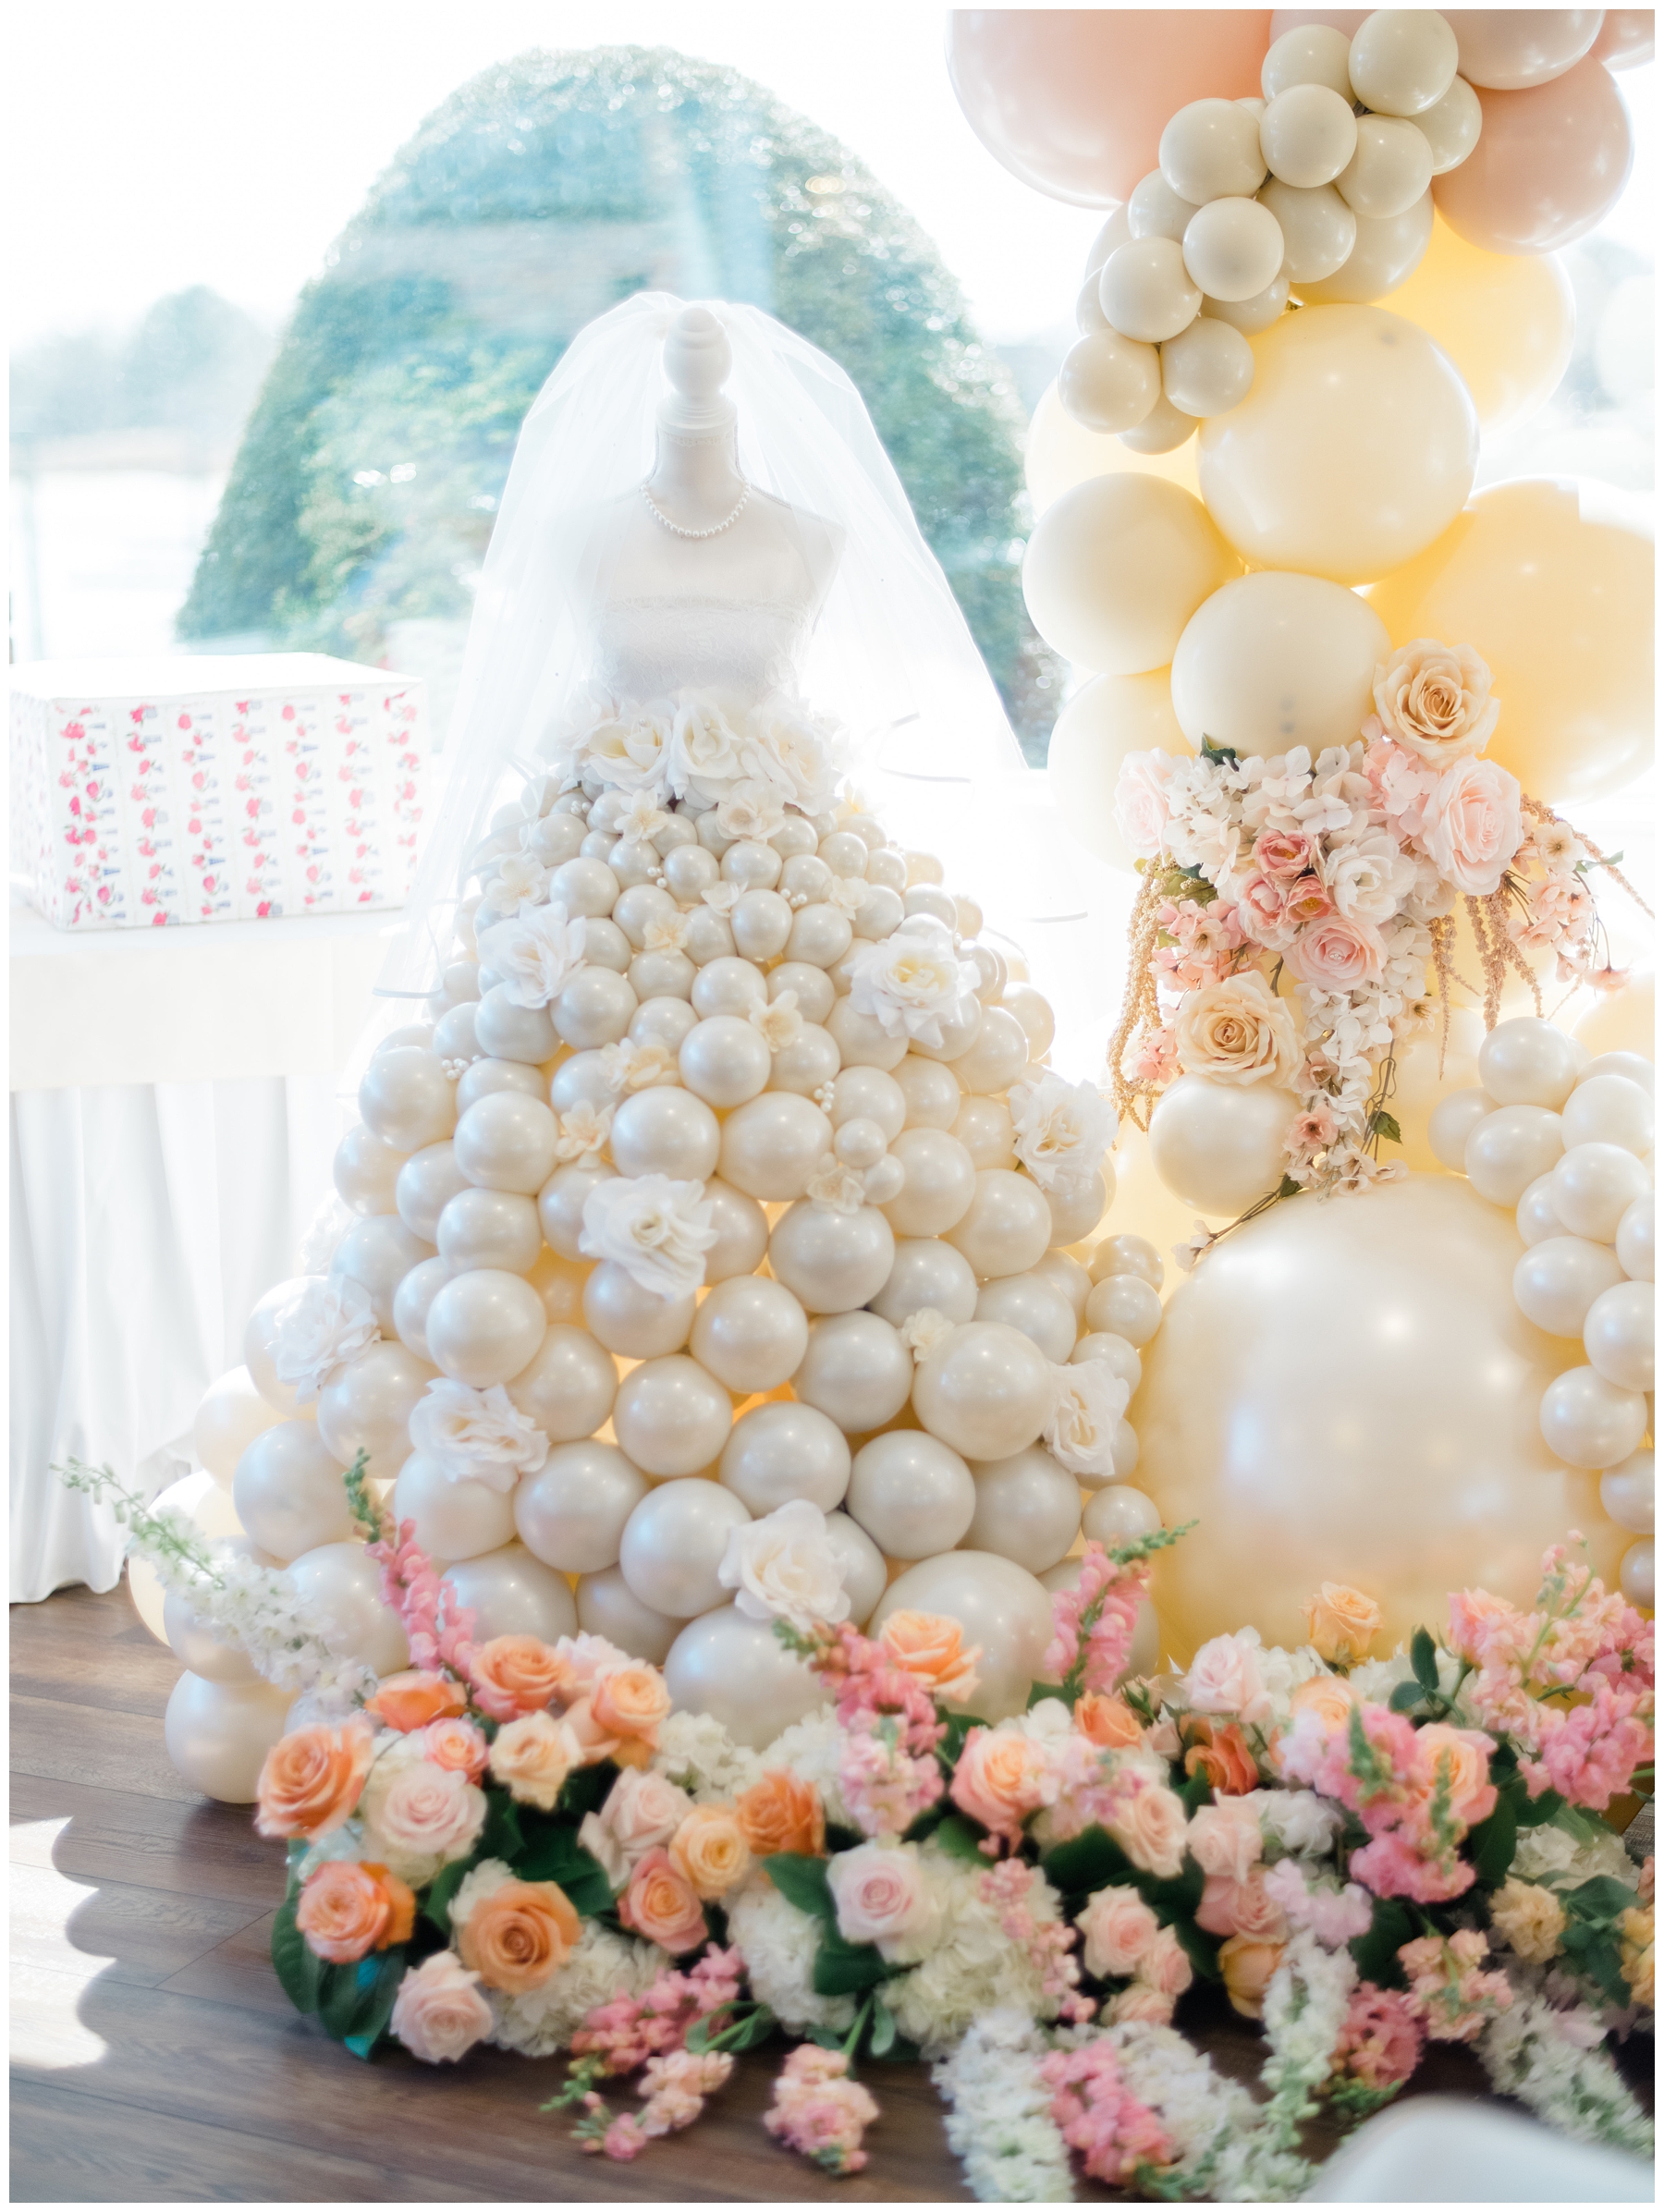 bride balloon display by Balloonacy Boston from Dreamy Bridal shower photographed by Boston Engagement photographer Stephanie Berenson